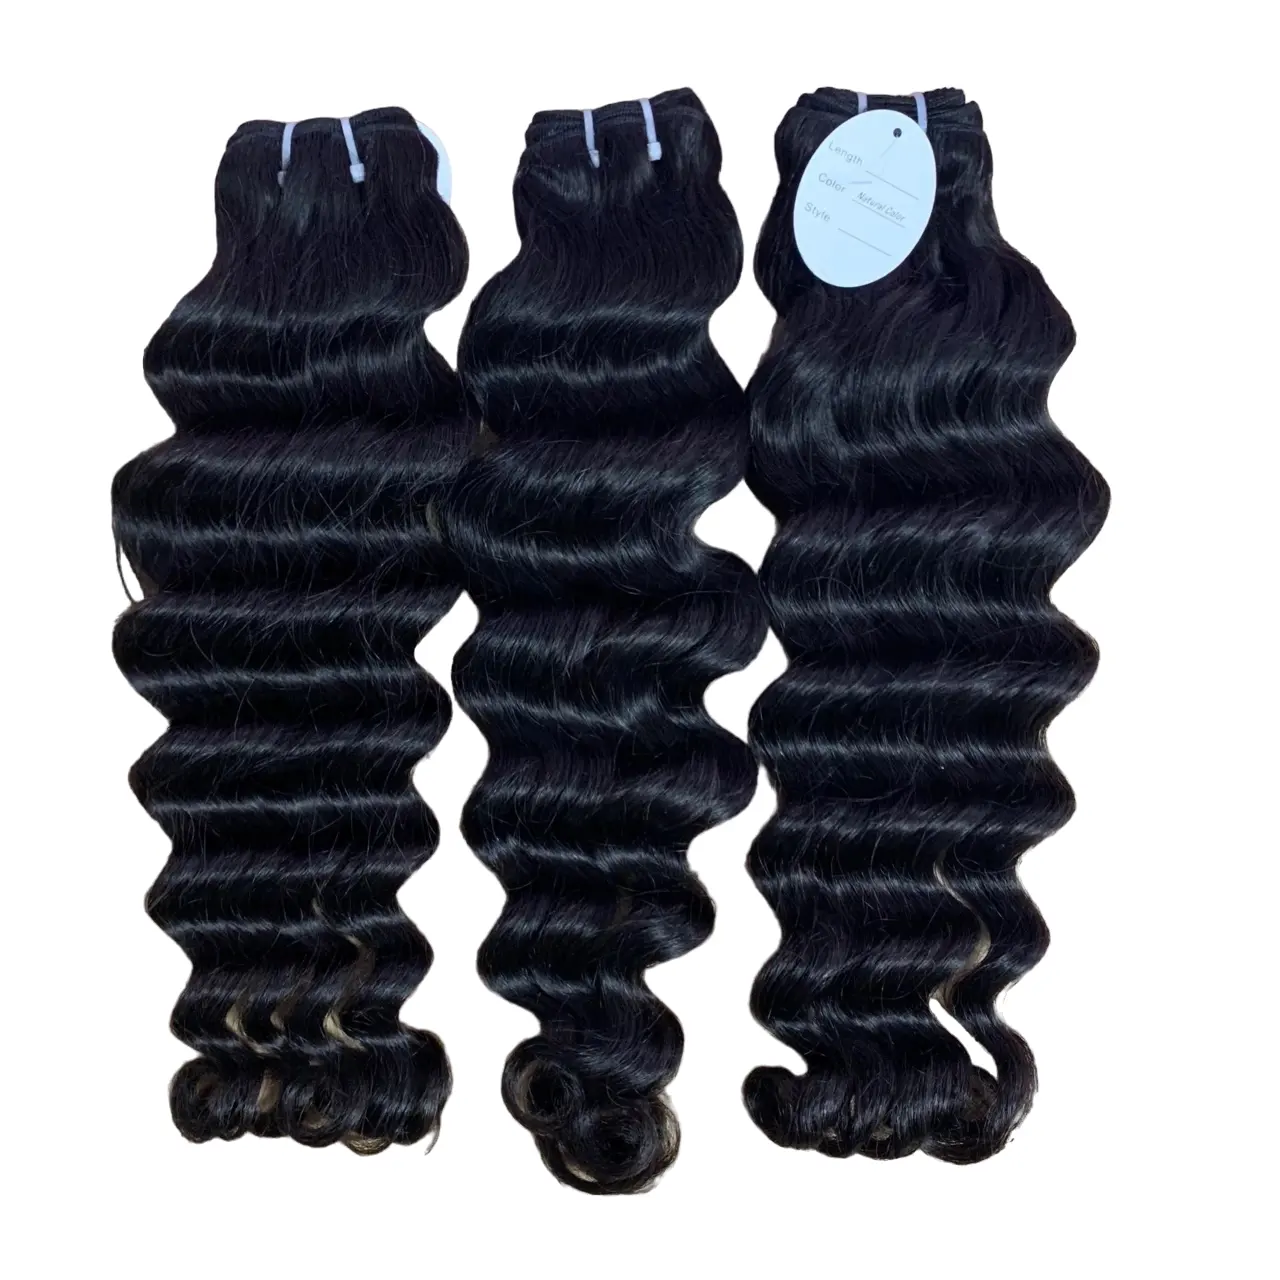 Vietnam machine weft hair colorful human weft cheap straight human hair curly wavy high quality